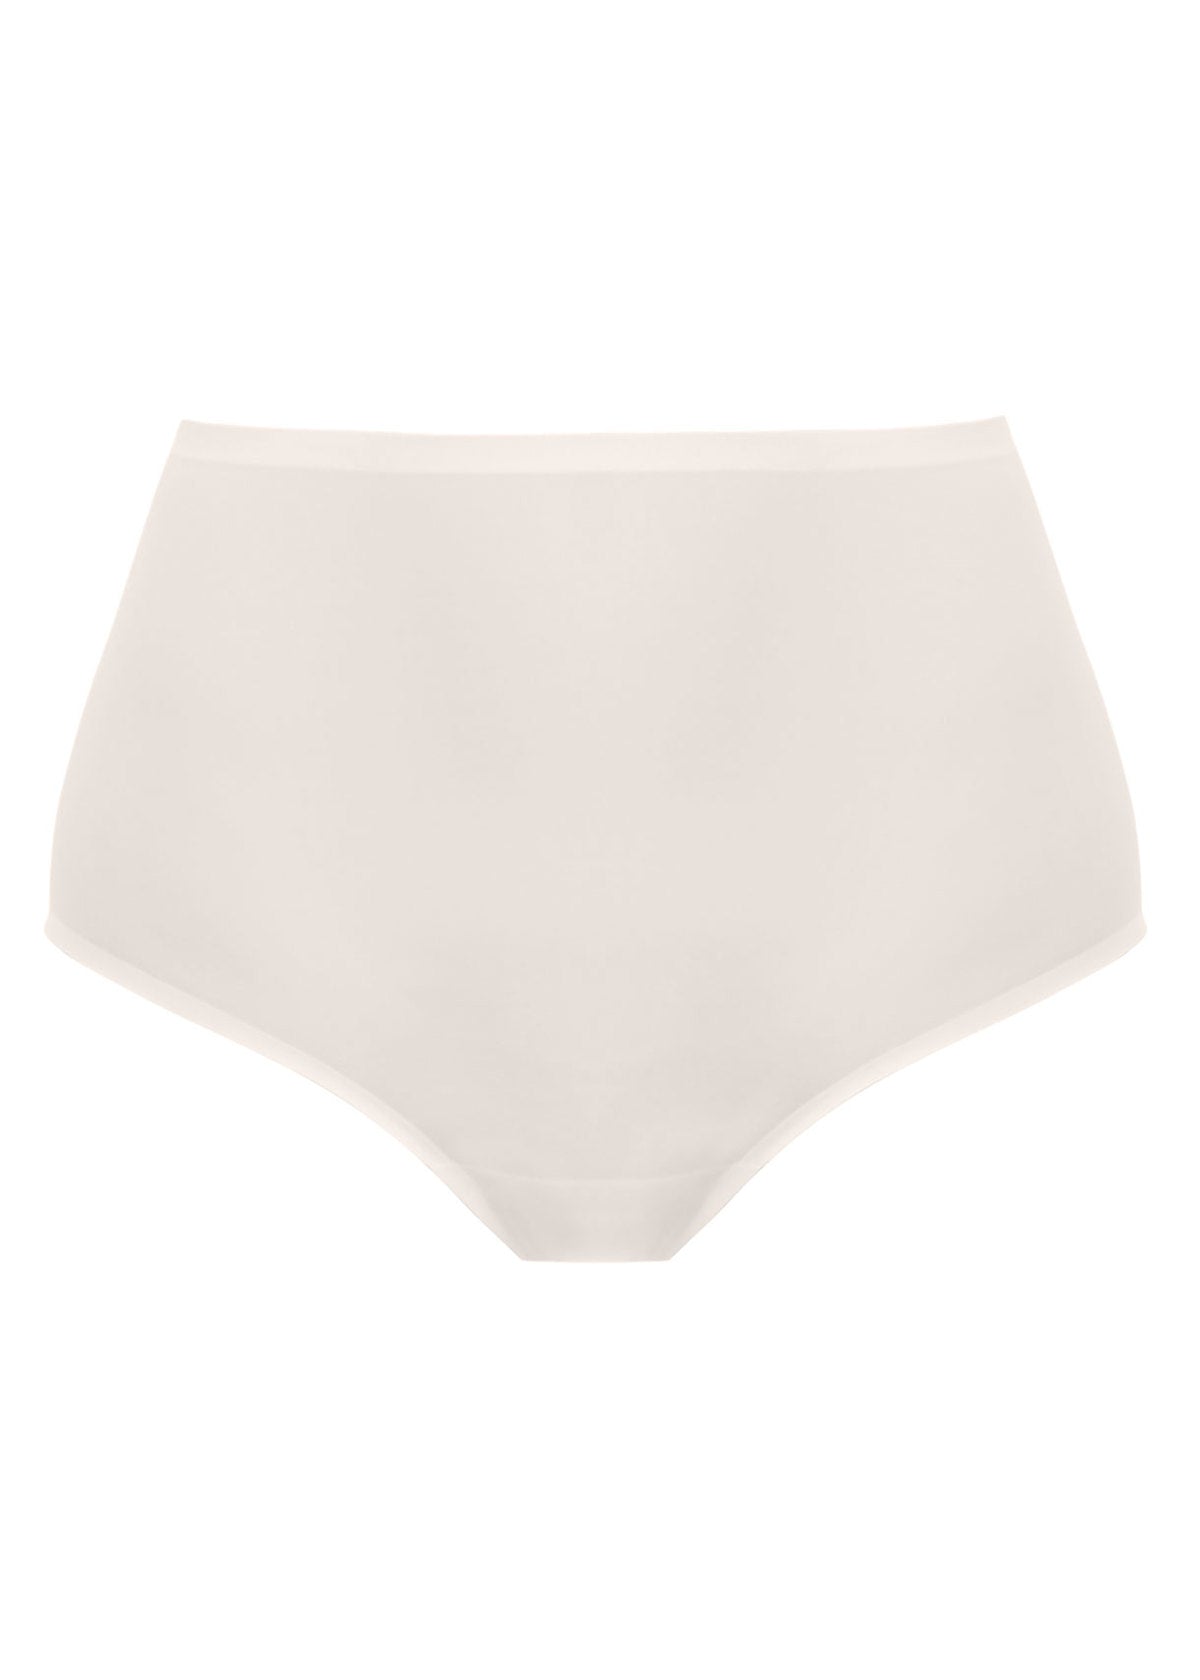 Fantasie Smoothease Invisible Stretch Full Brief - Ivory 3 Shaws Department Stores